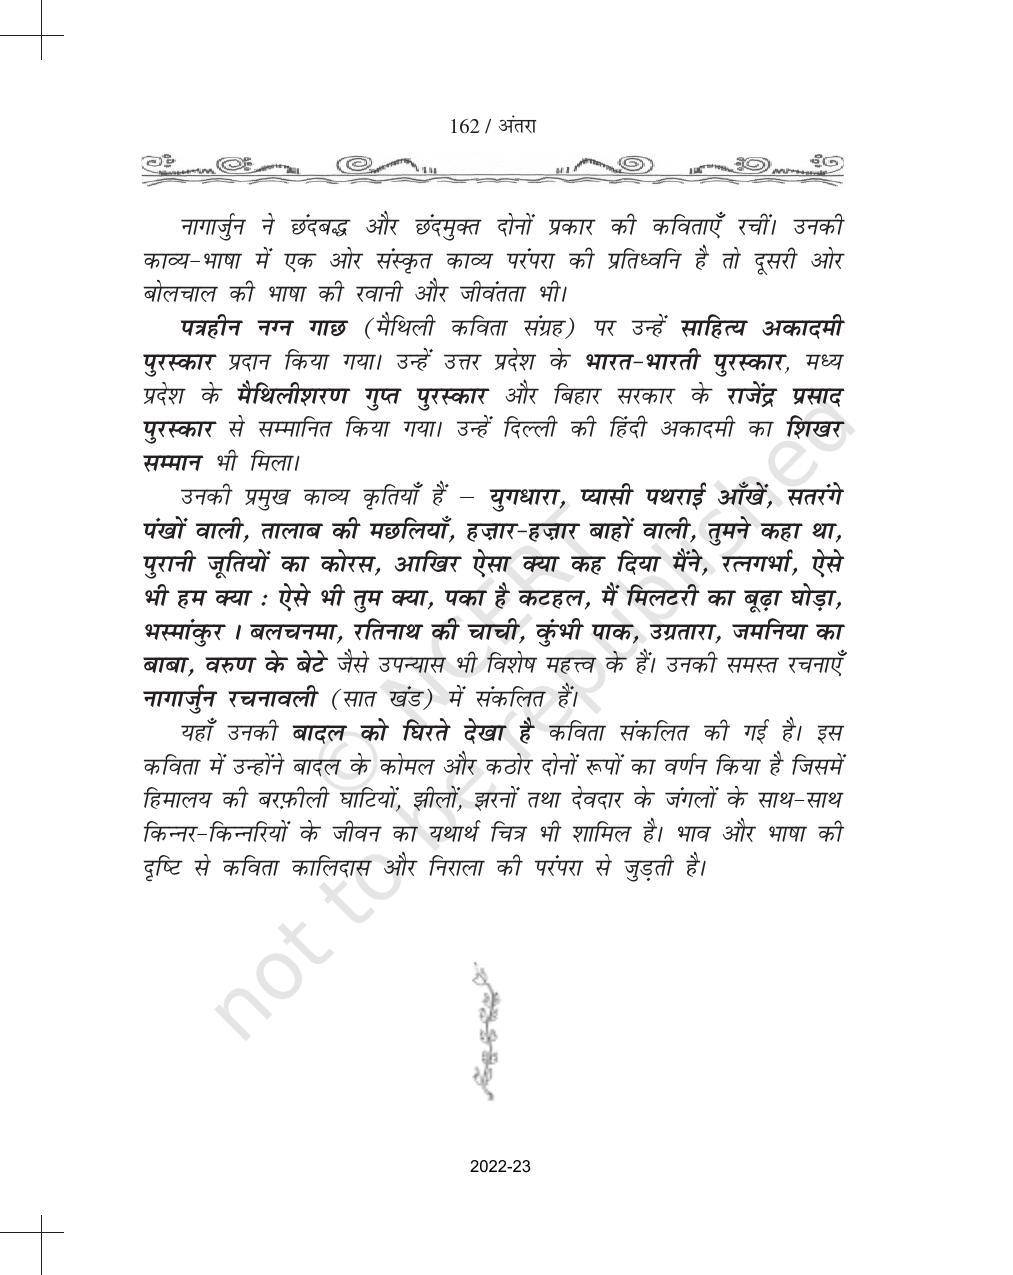 NCERT Book for Class 11 Hindi Antra Chapter 17 नागार्जुन - Page 2